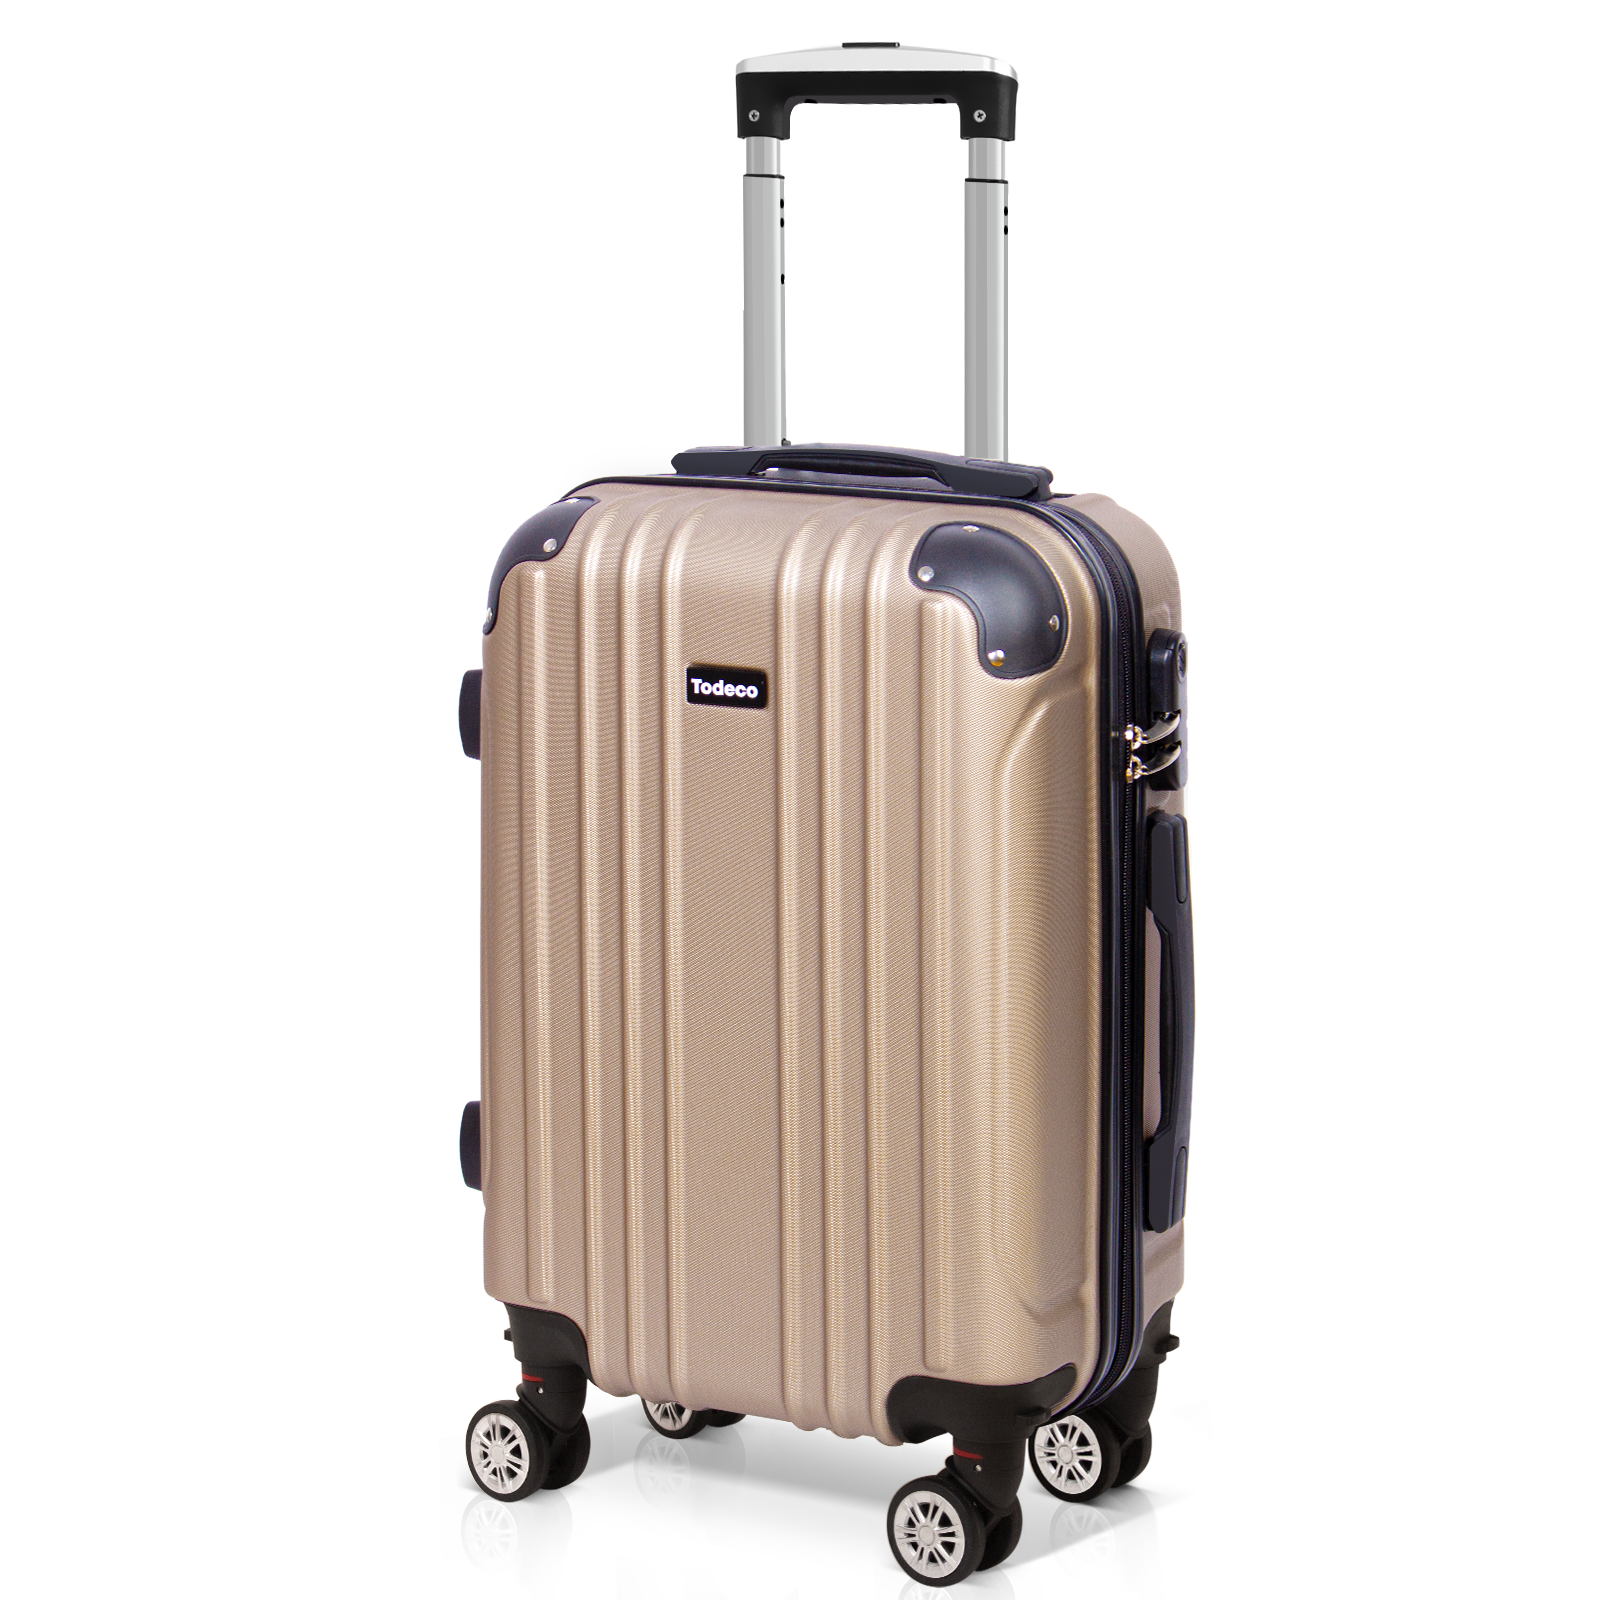 Todeco-Cabin-Suitcase-55cm-Lightweight-Carry-on-Suitcase-with-Hard-Shell-Travel-Suitcase-Rigid-and-Lightweight-ABS-with-4-Double-Wheels-55x35x22cm-Champagne-Cabin-Suitcase-55cm-Champagne